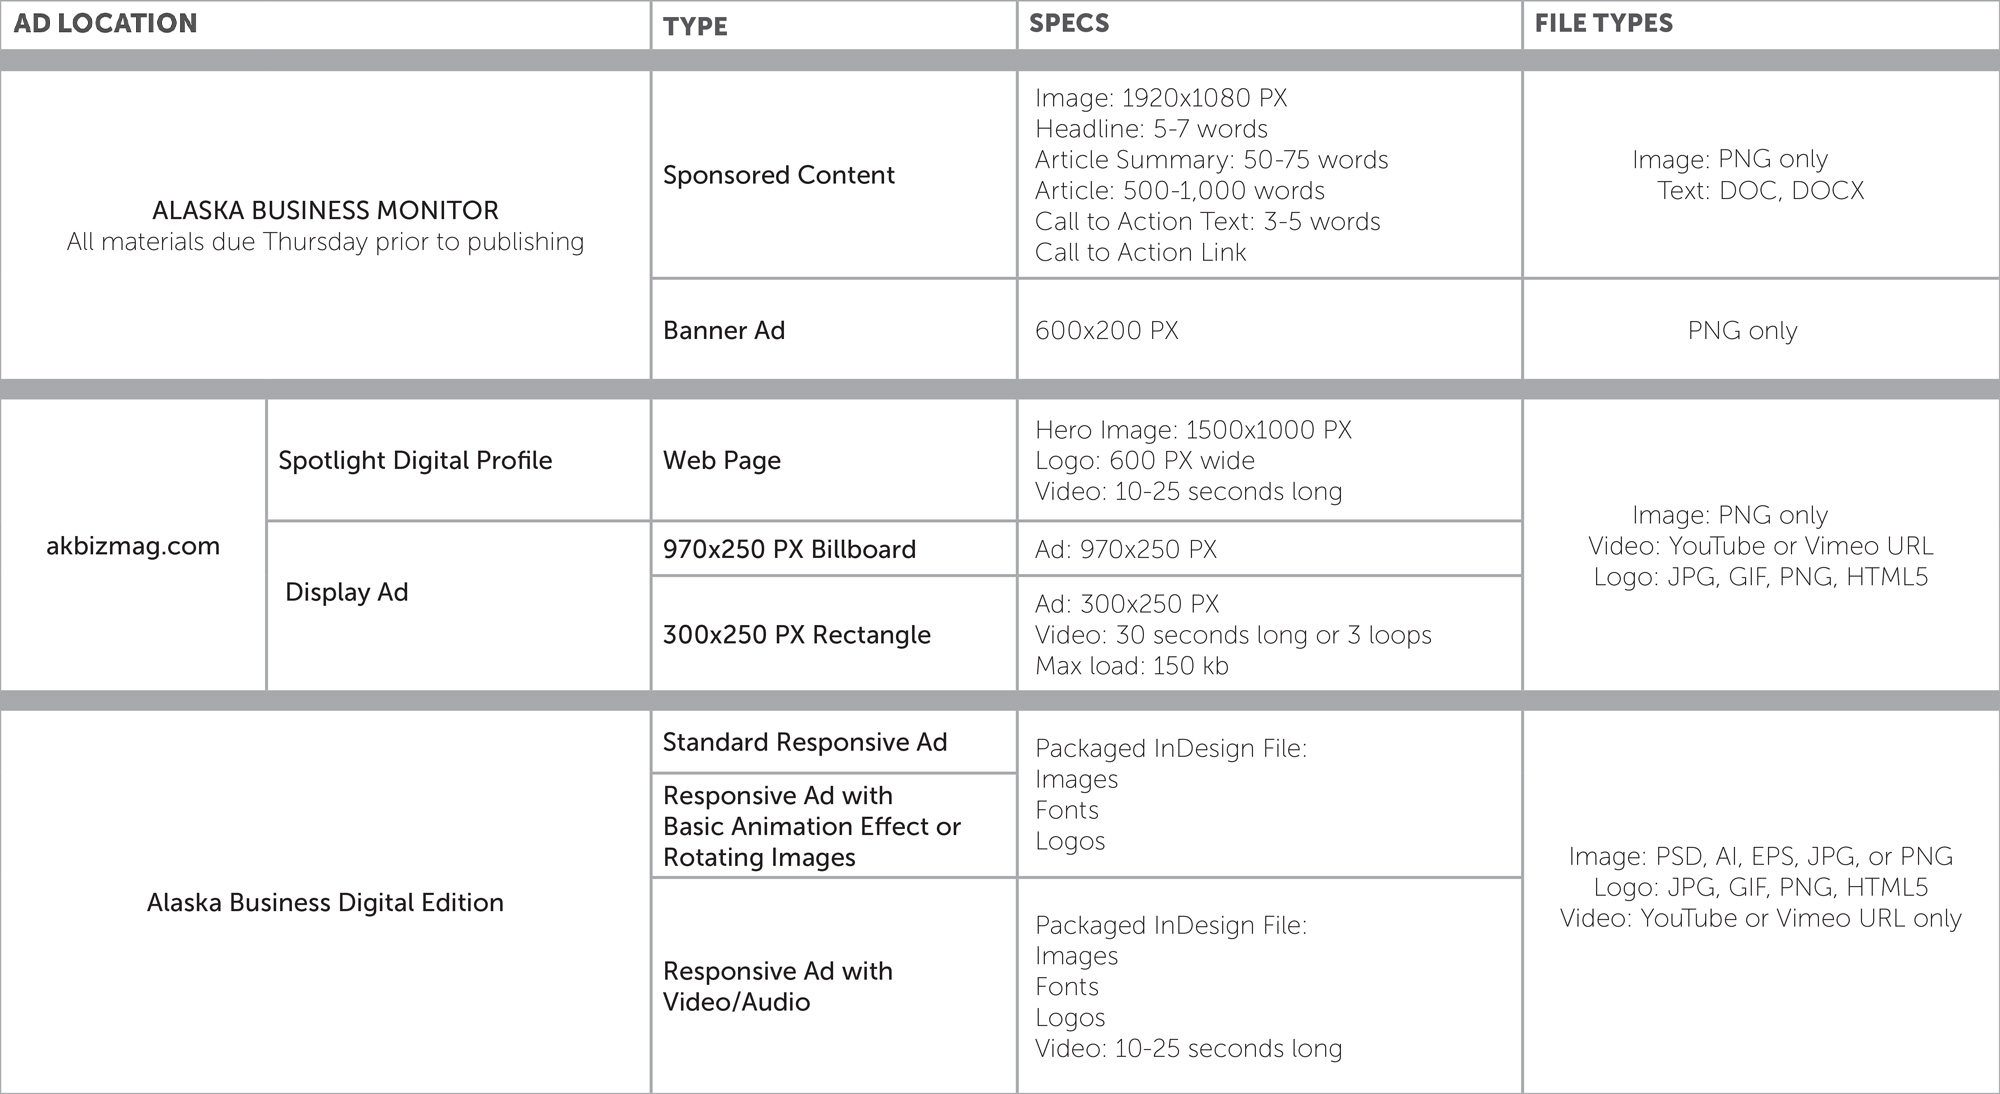 Digital Specifications table